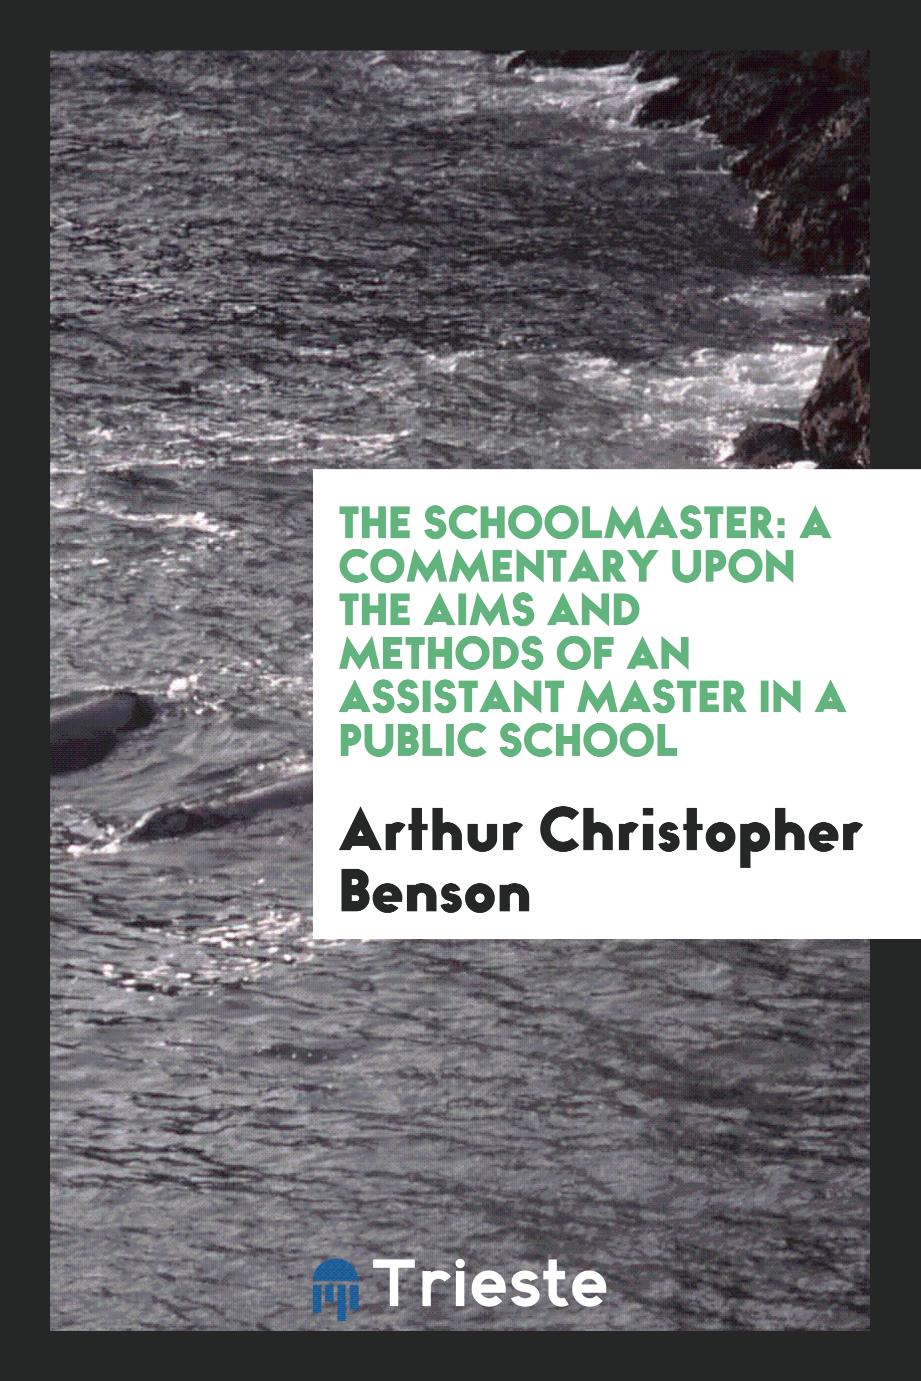 The Schoolmaster: A Commentary upon the Aims and Methods of an Assistant Master in a Public School